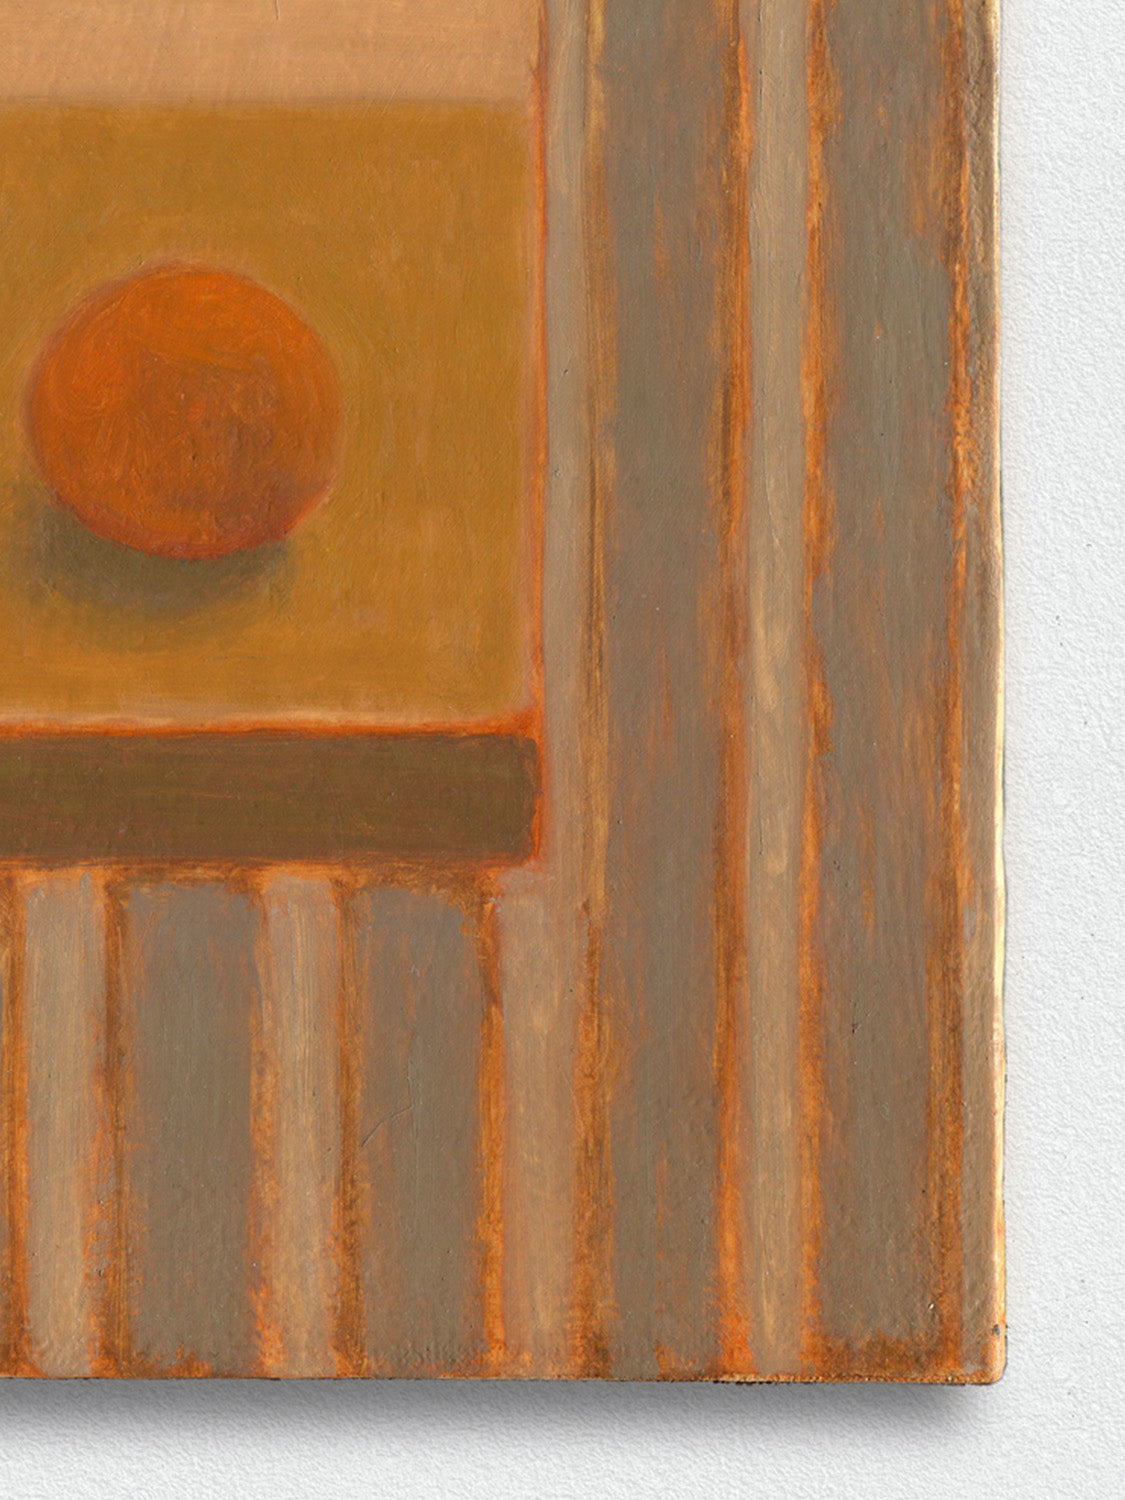 Painting of an Orange on a Wall #2